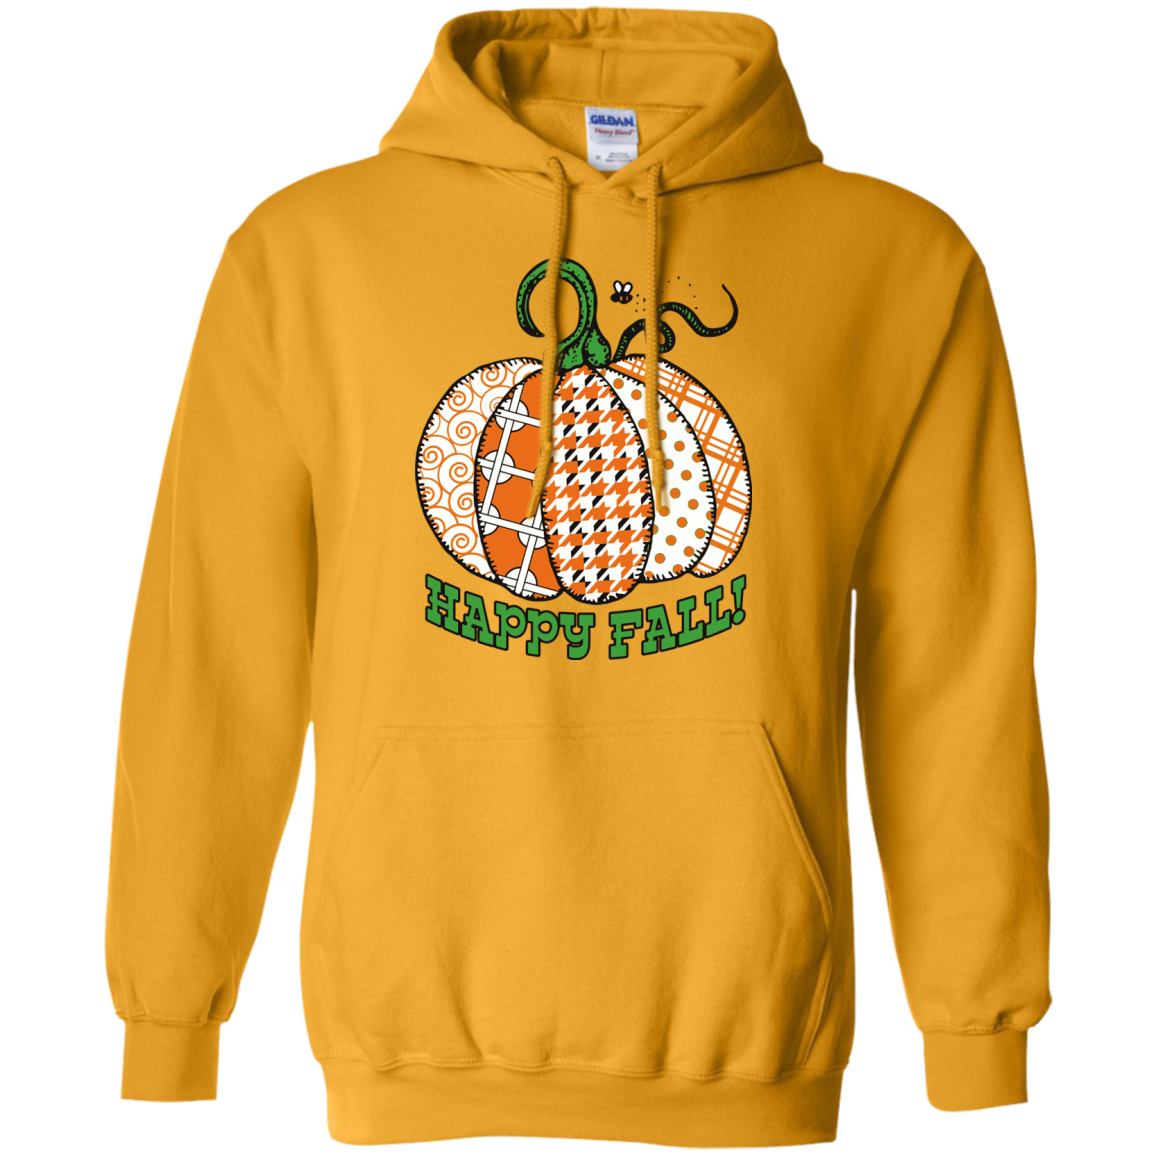 Happy Fall! Pullover Hoodies - Crafter4Life - 8